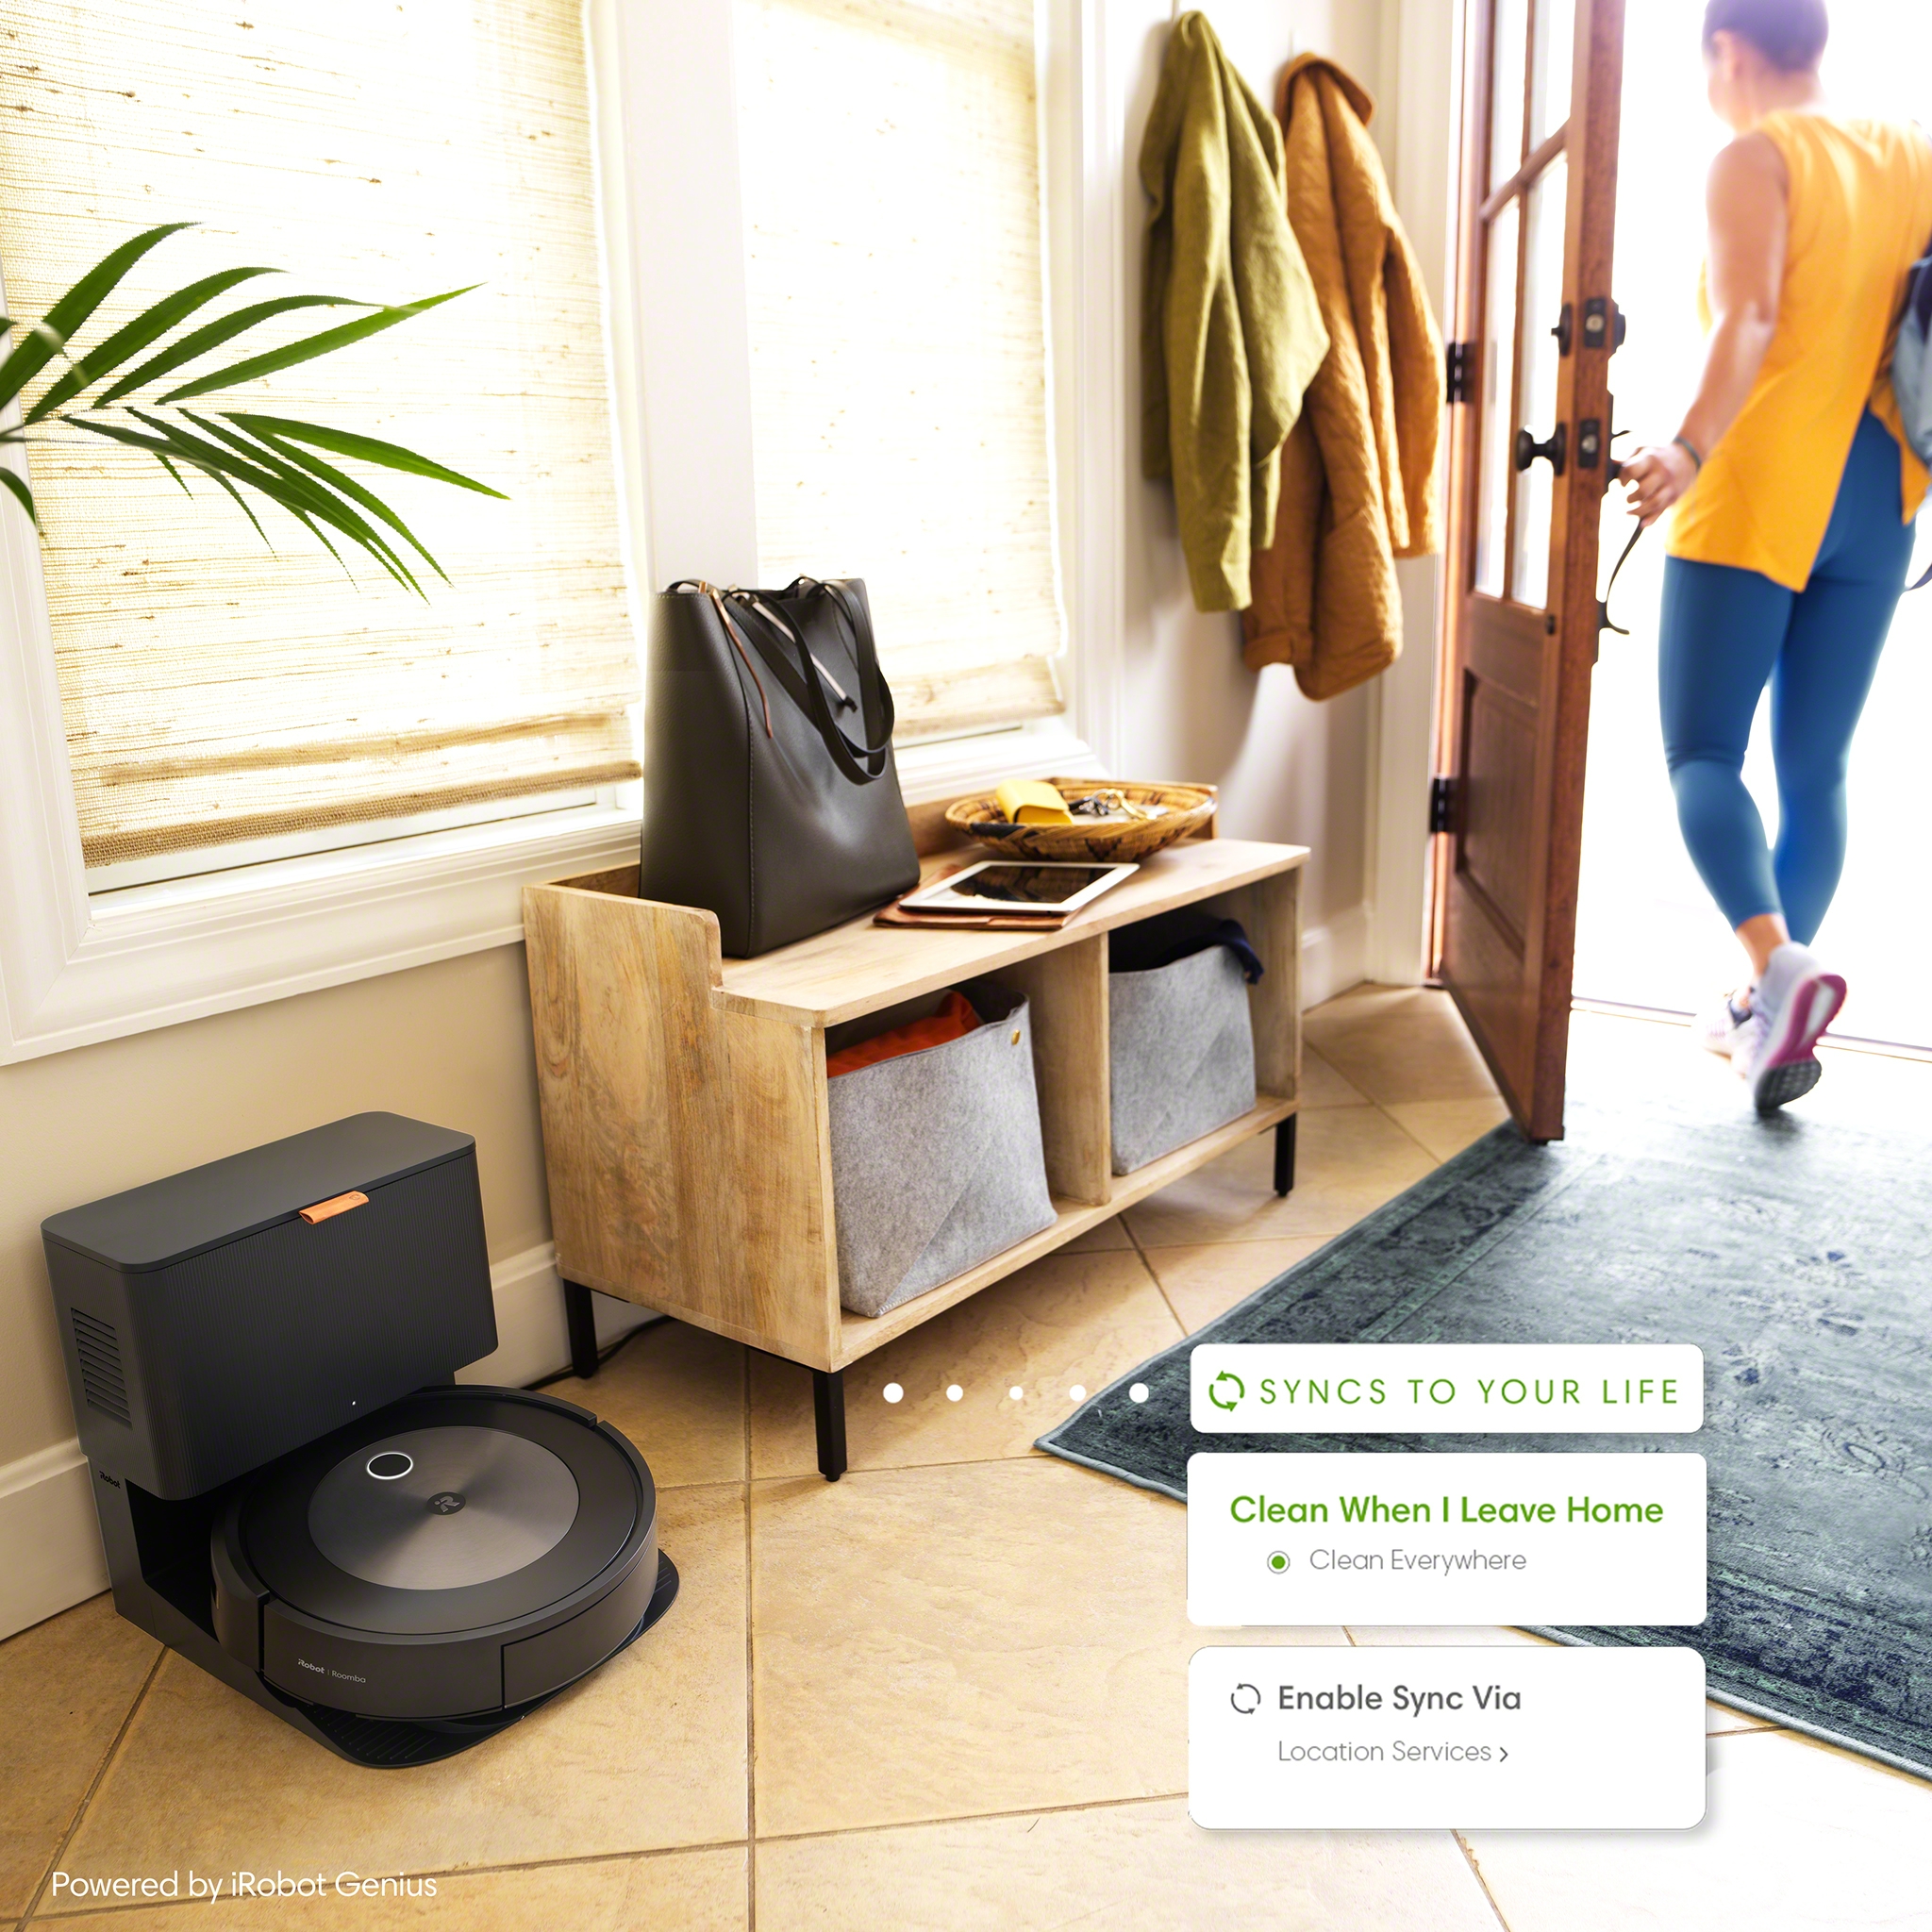 Tolk Kemi Intrusion iRobot Introduces Roomba® j7+ Robot Vacuum with Genius™ 3.0 Home  Intelligence - Clean the Way You Want, So You Can Human